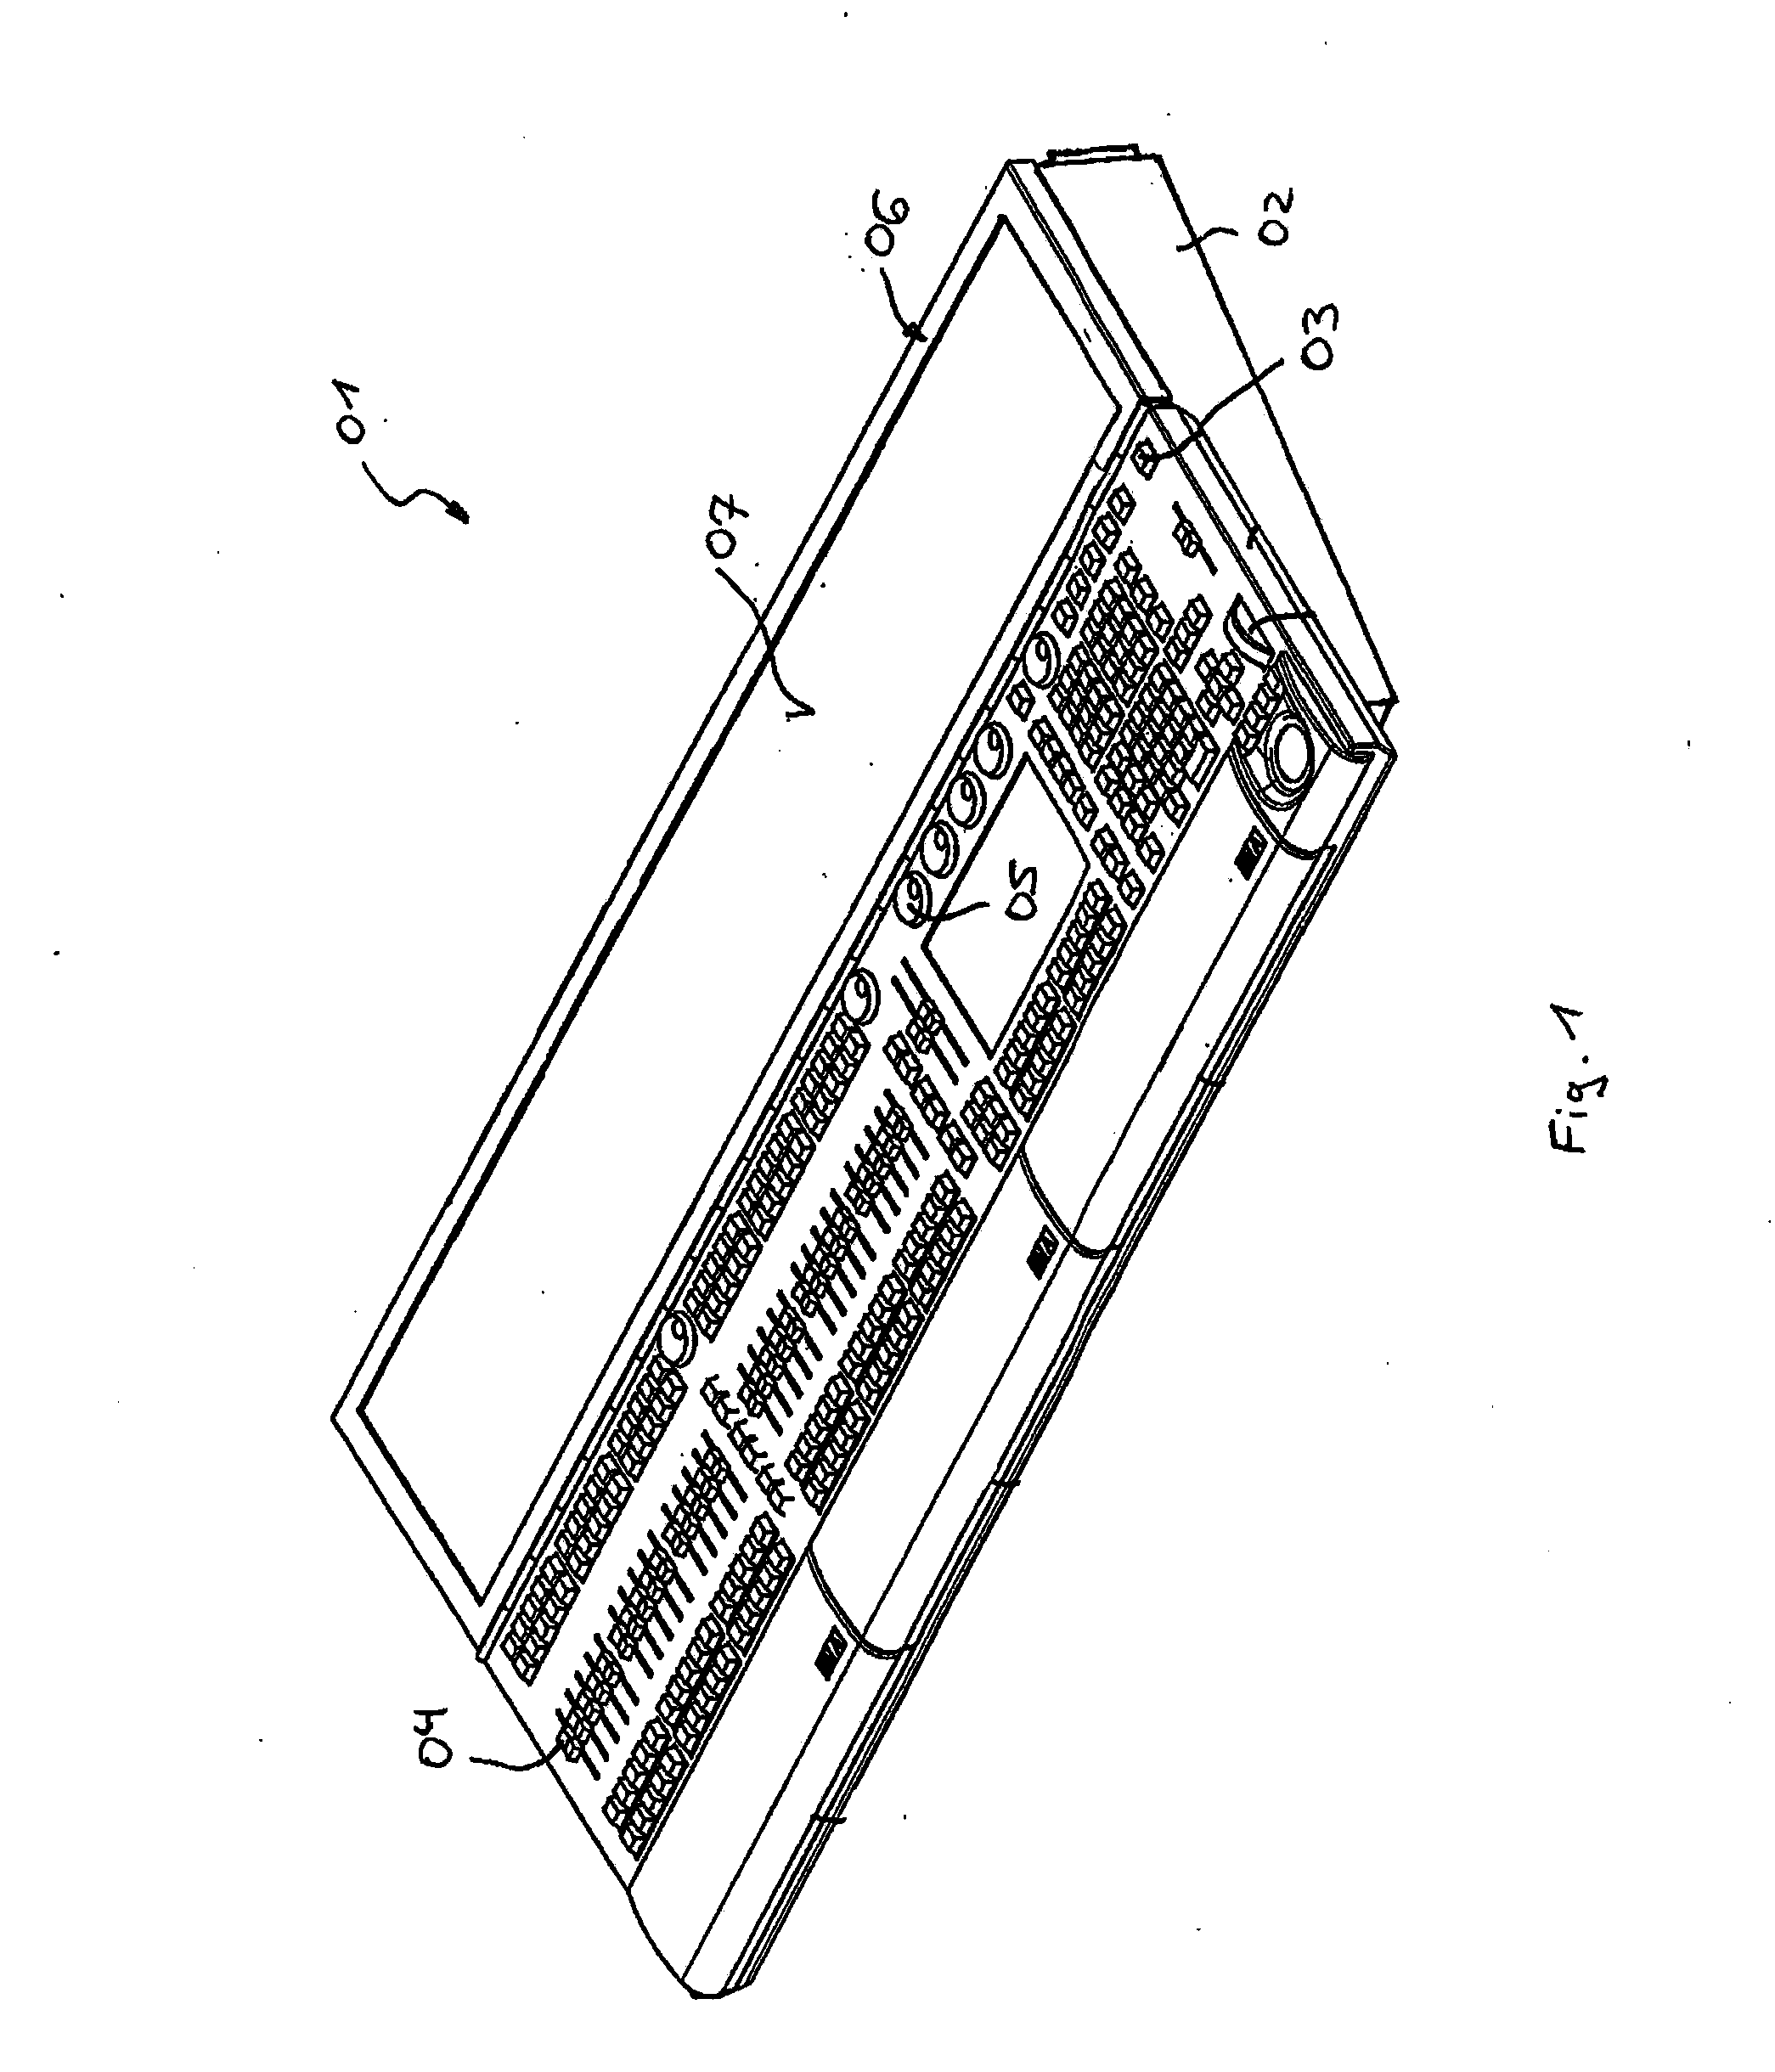 Lighting Control Console For Controlling A Lighting System